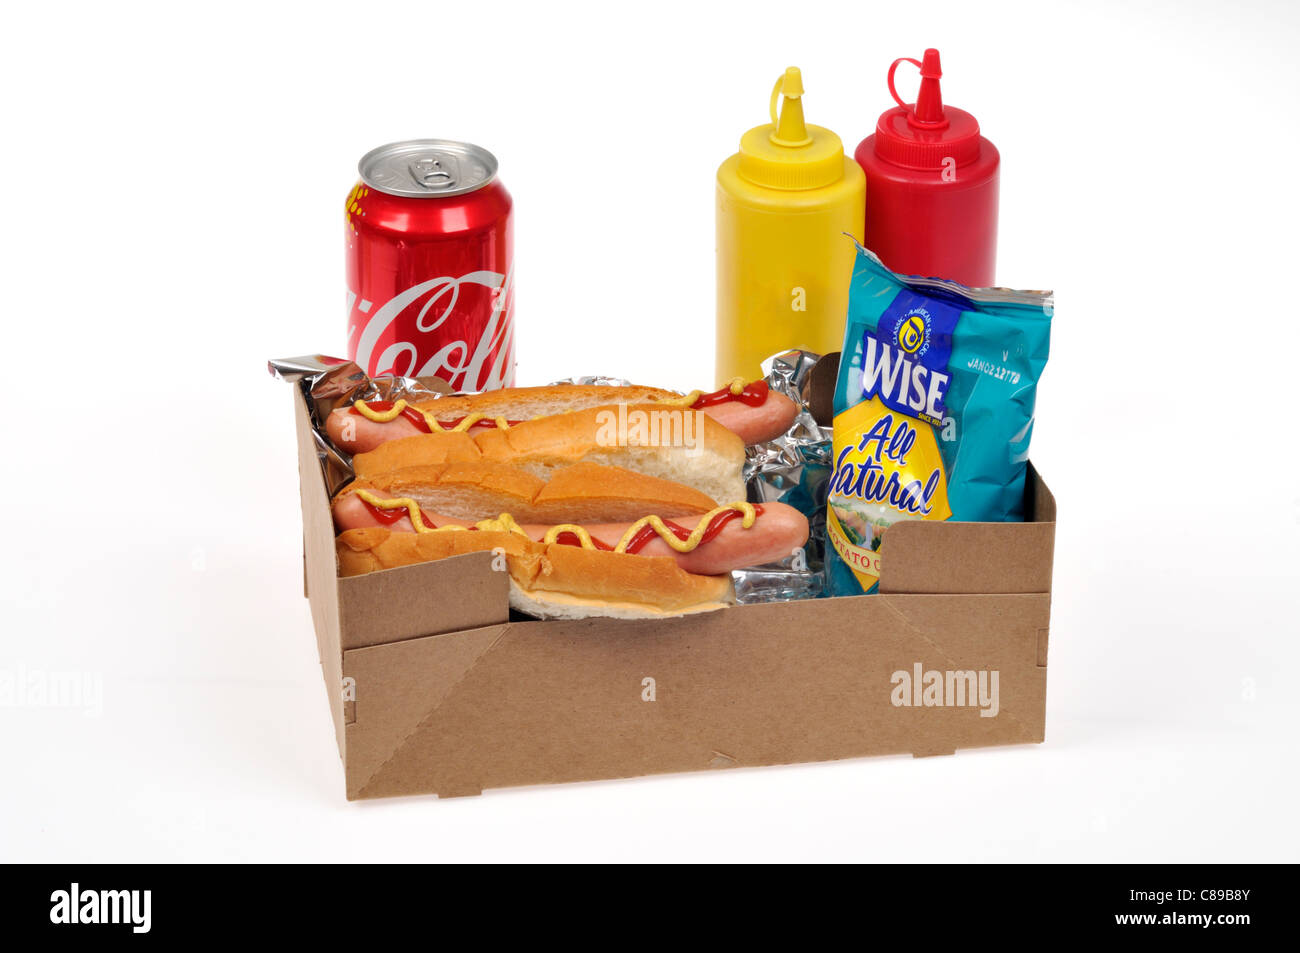 2 hotdogs, bag of potato chips and a coke in a take away tray with mustard and ketchup condiments on white background. Stock Photo